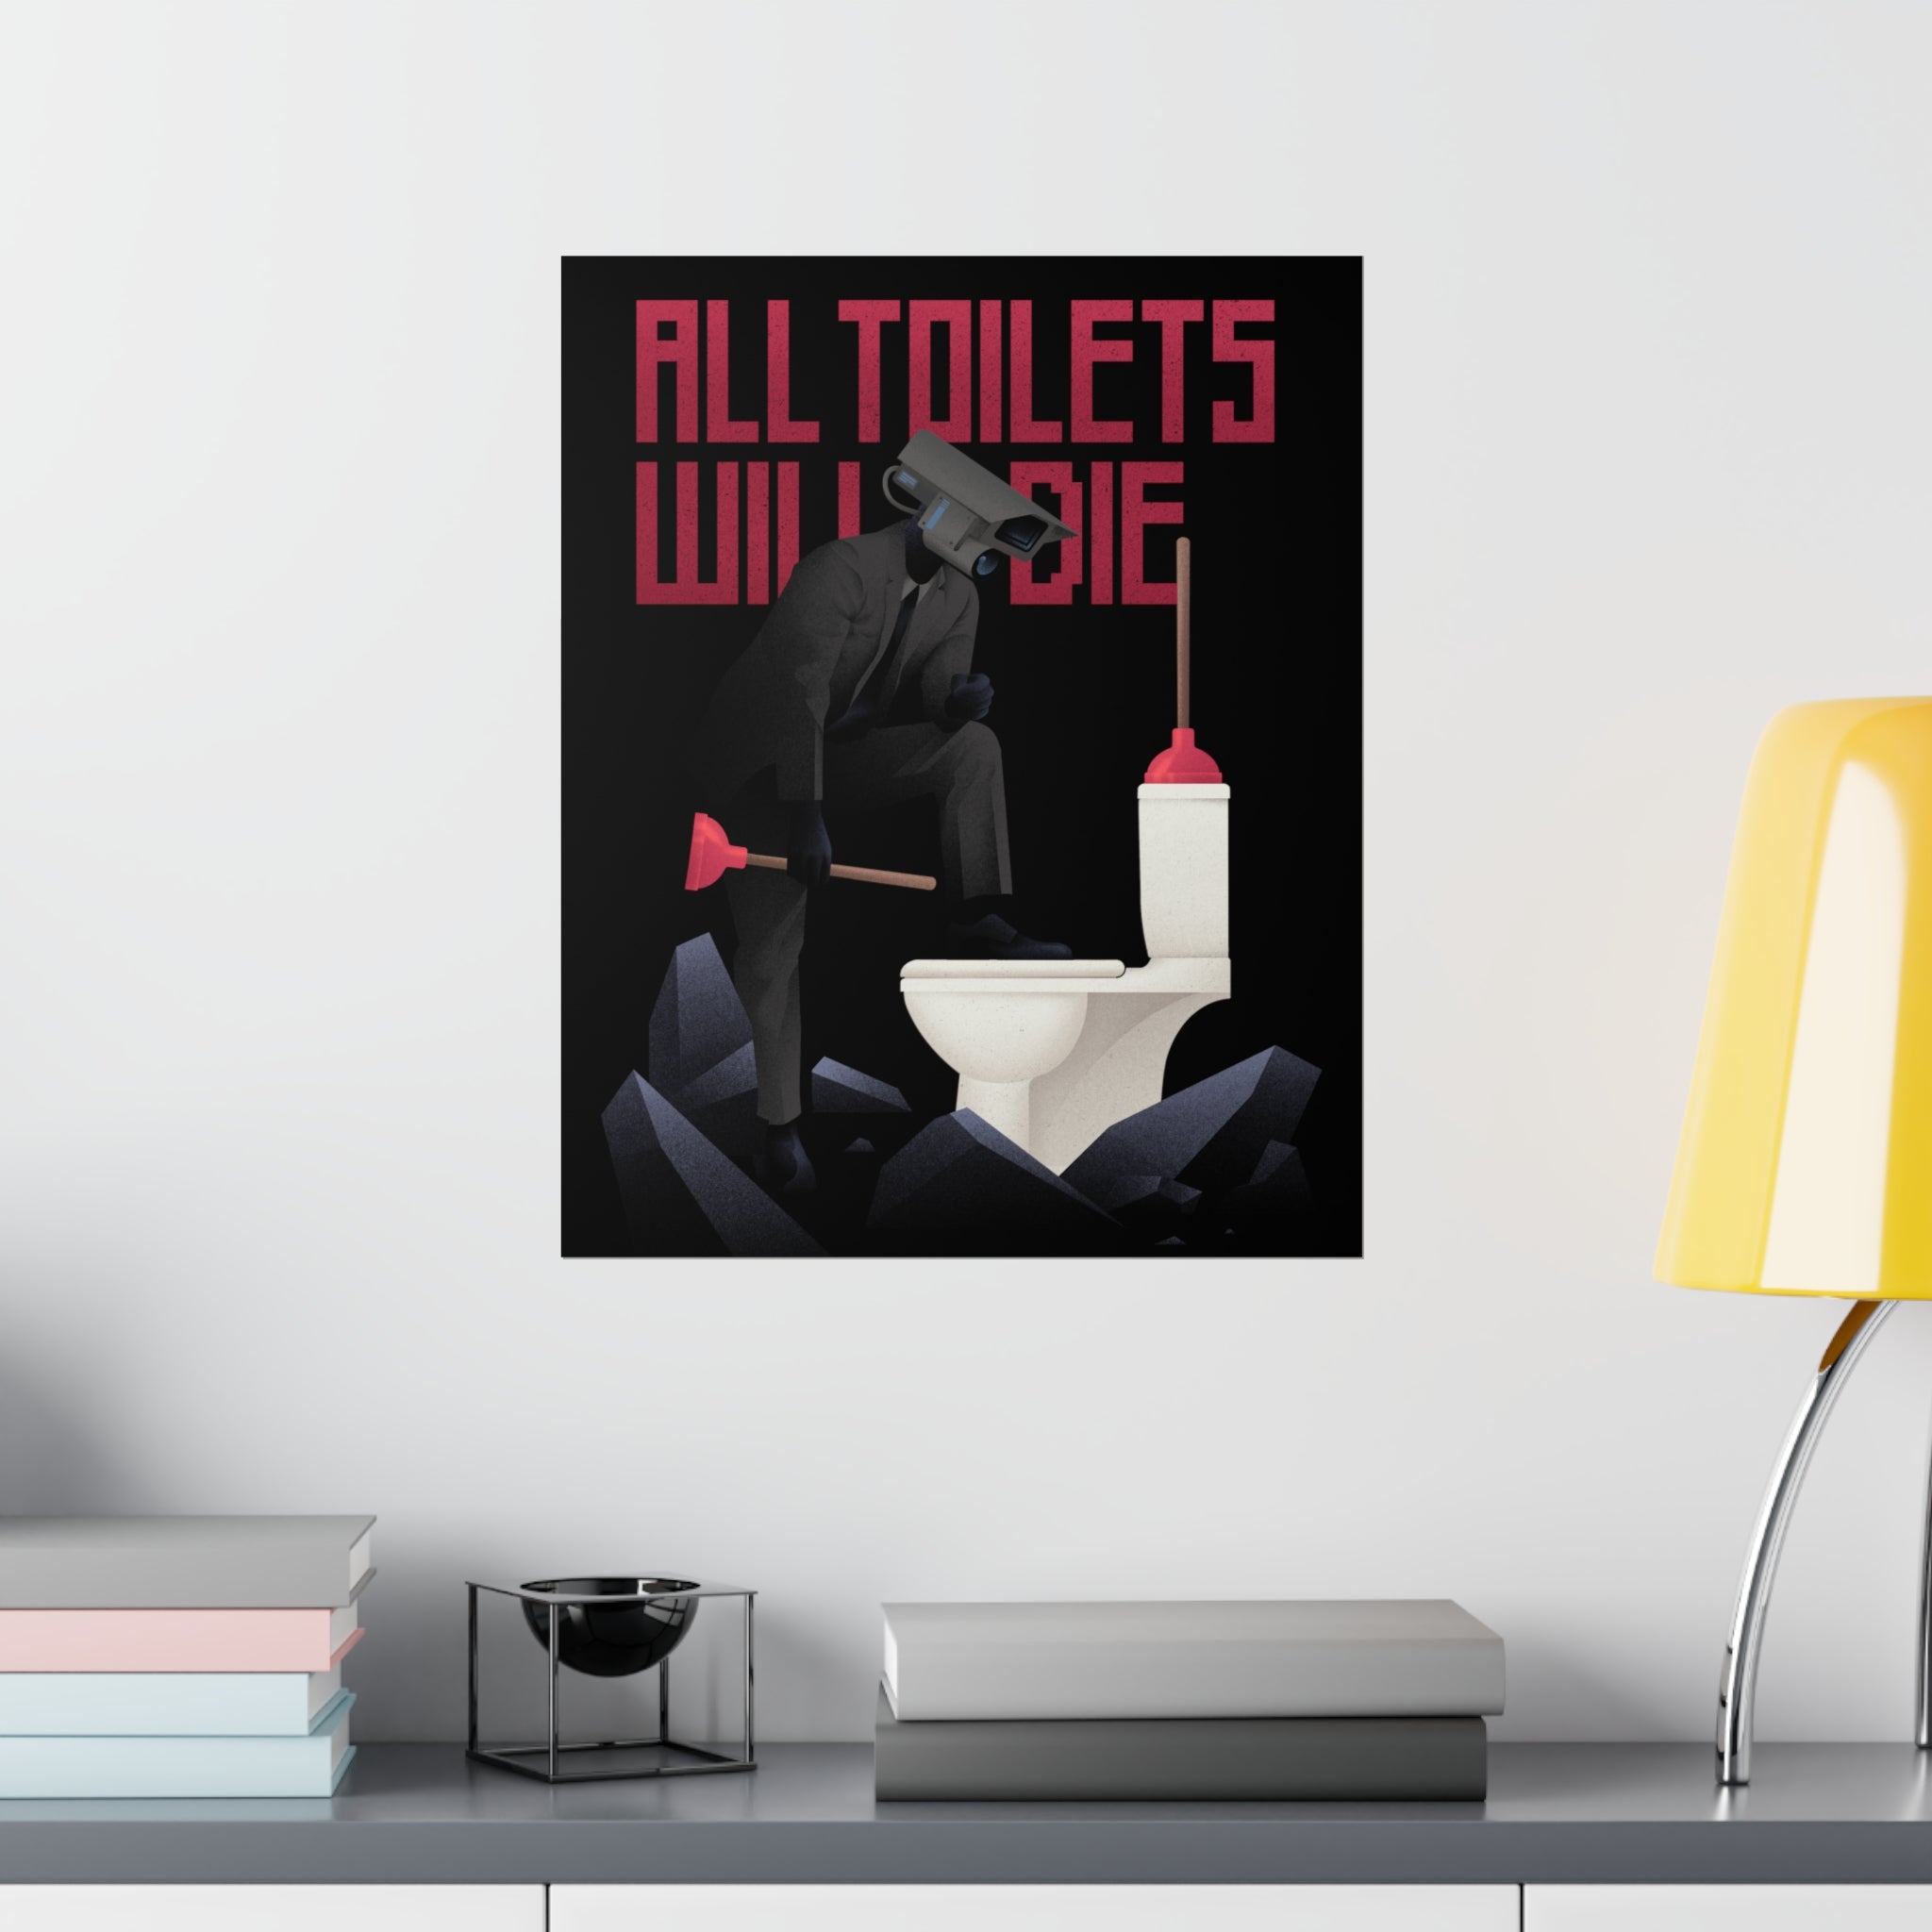 All Toilets Will Die Poster. Plungerman shown stepping on a skibidi toilet, with ALL TOILETS WILL DIE seen behind him text